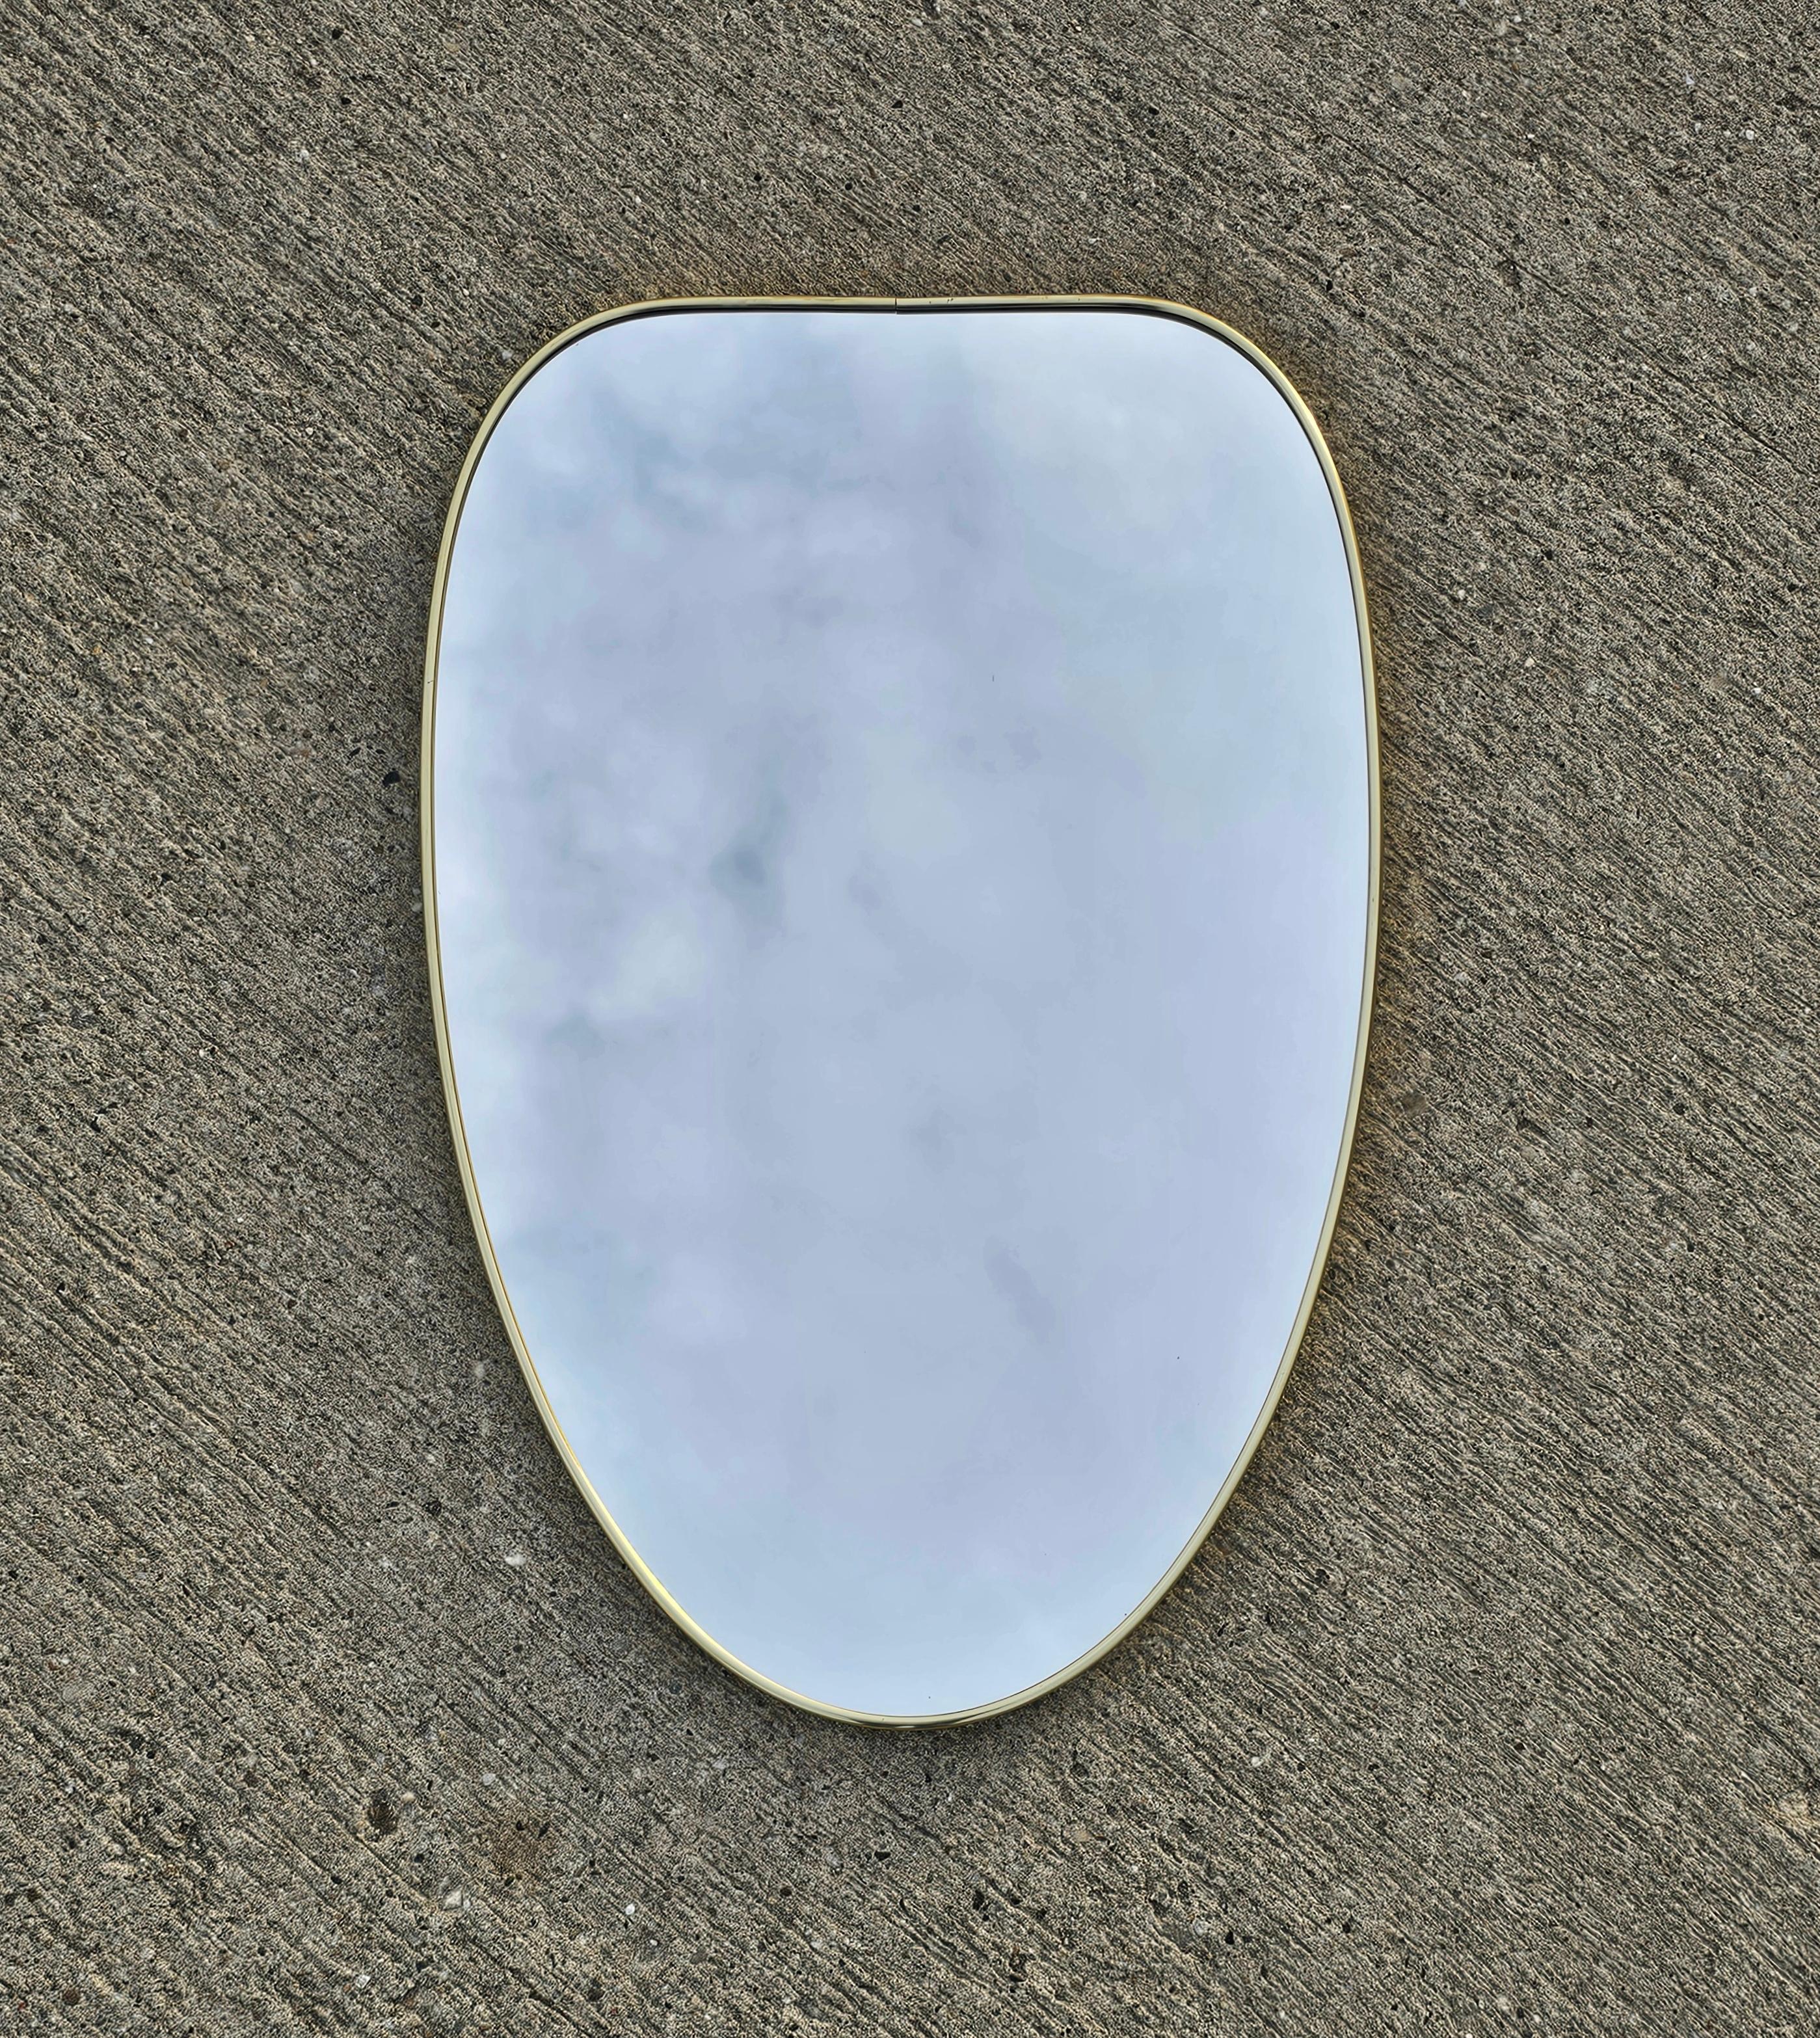 In this listing you will find a striking oval-ish shaped Mid Century Modern 
wall mirror in brass frame in the style of Gio Ponti. Medium format and gorgeous shape make this mirror a hard to find piece. Made in Italy in 1950s.

Mirror is in a very